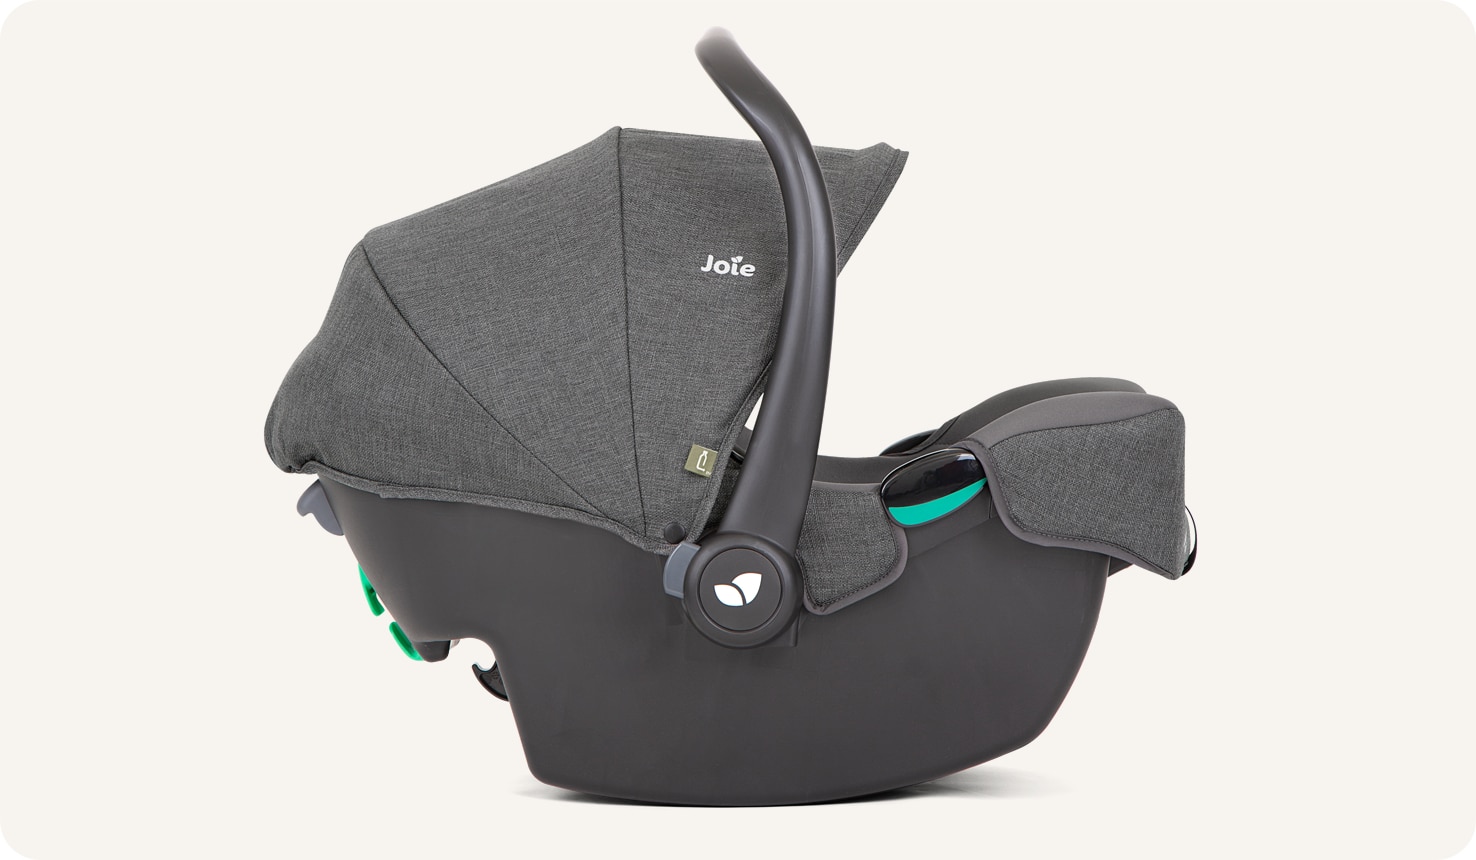 Gray Joie I-Snug 2 infant car seat in profile facing to the right.